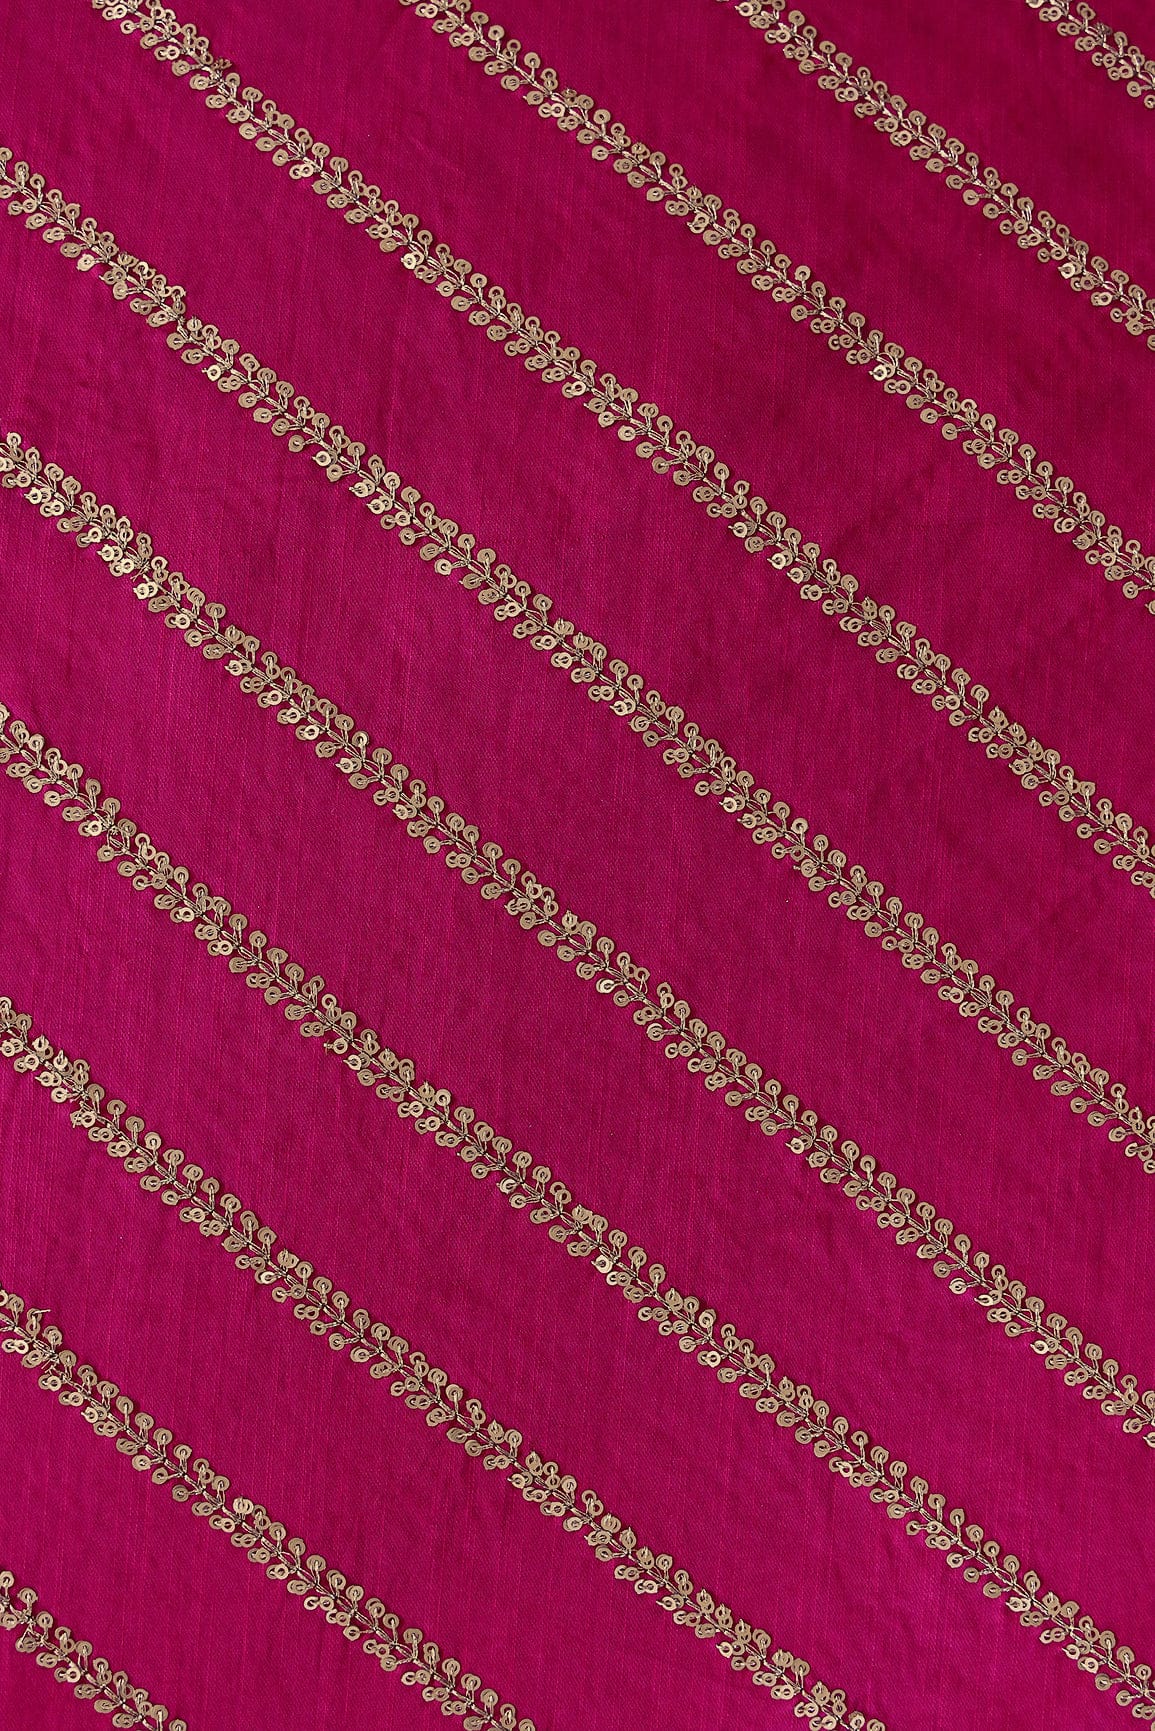 doeraa Embroidery Fabrics Gold Sequins With Gold Zari Stripes Embroidery Work On Rani Raw Silk Fabric